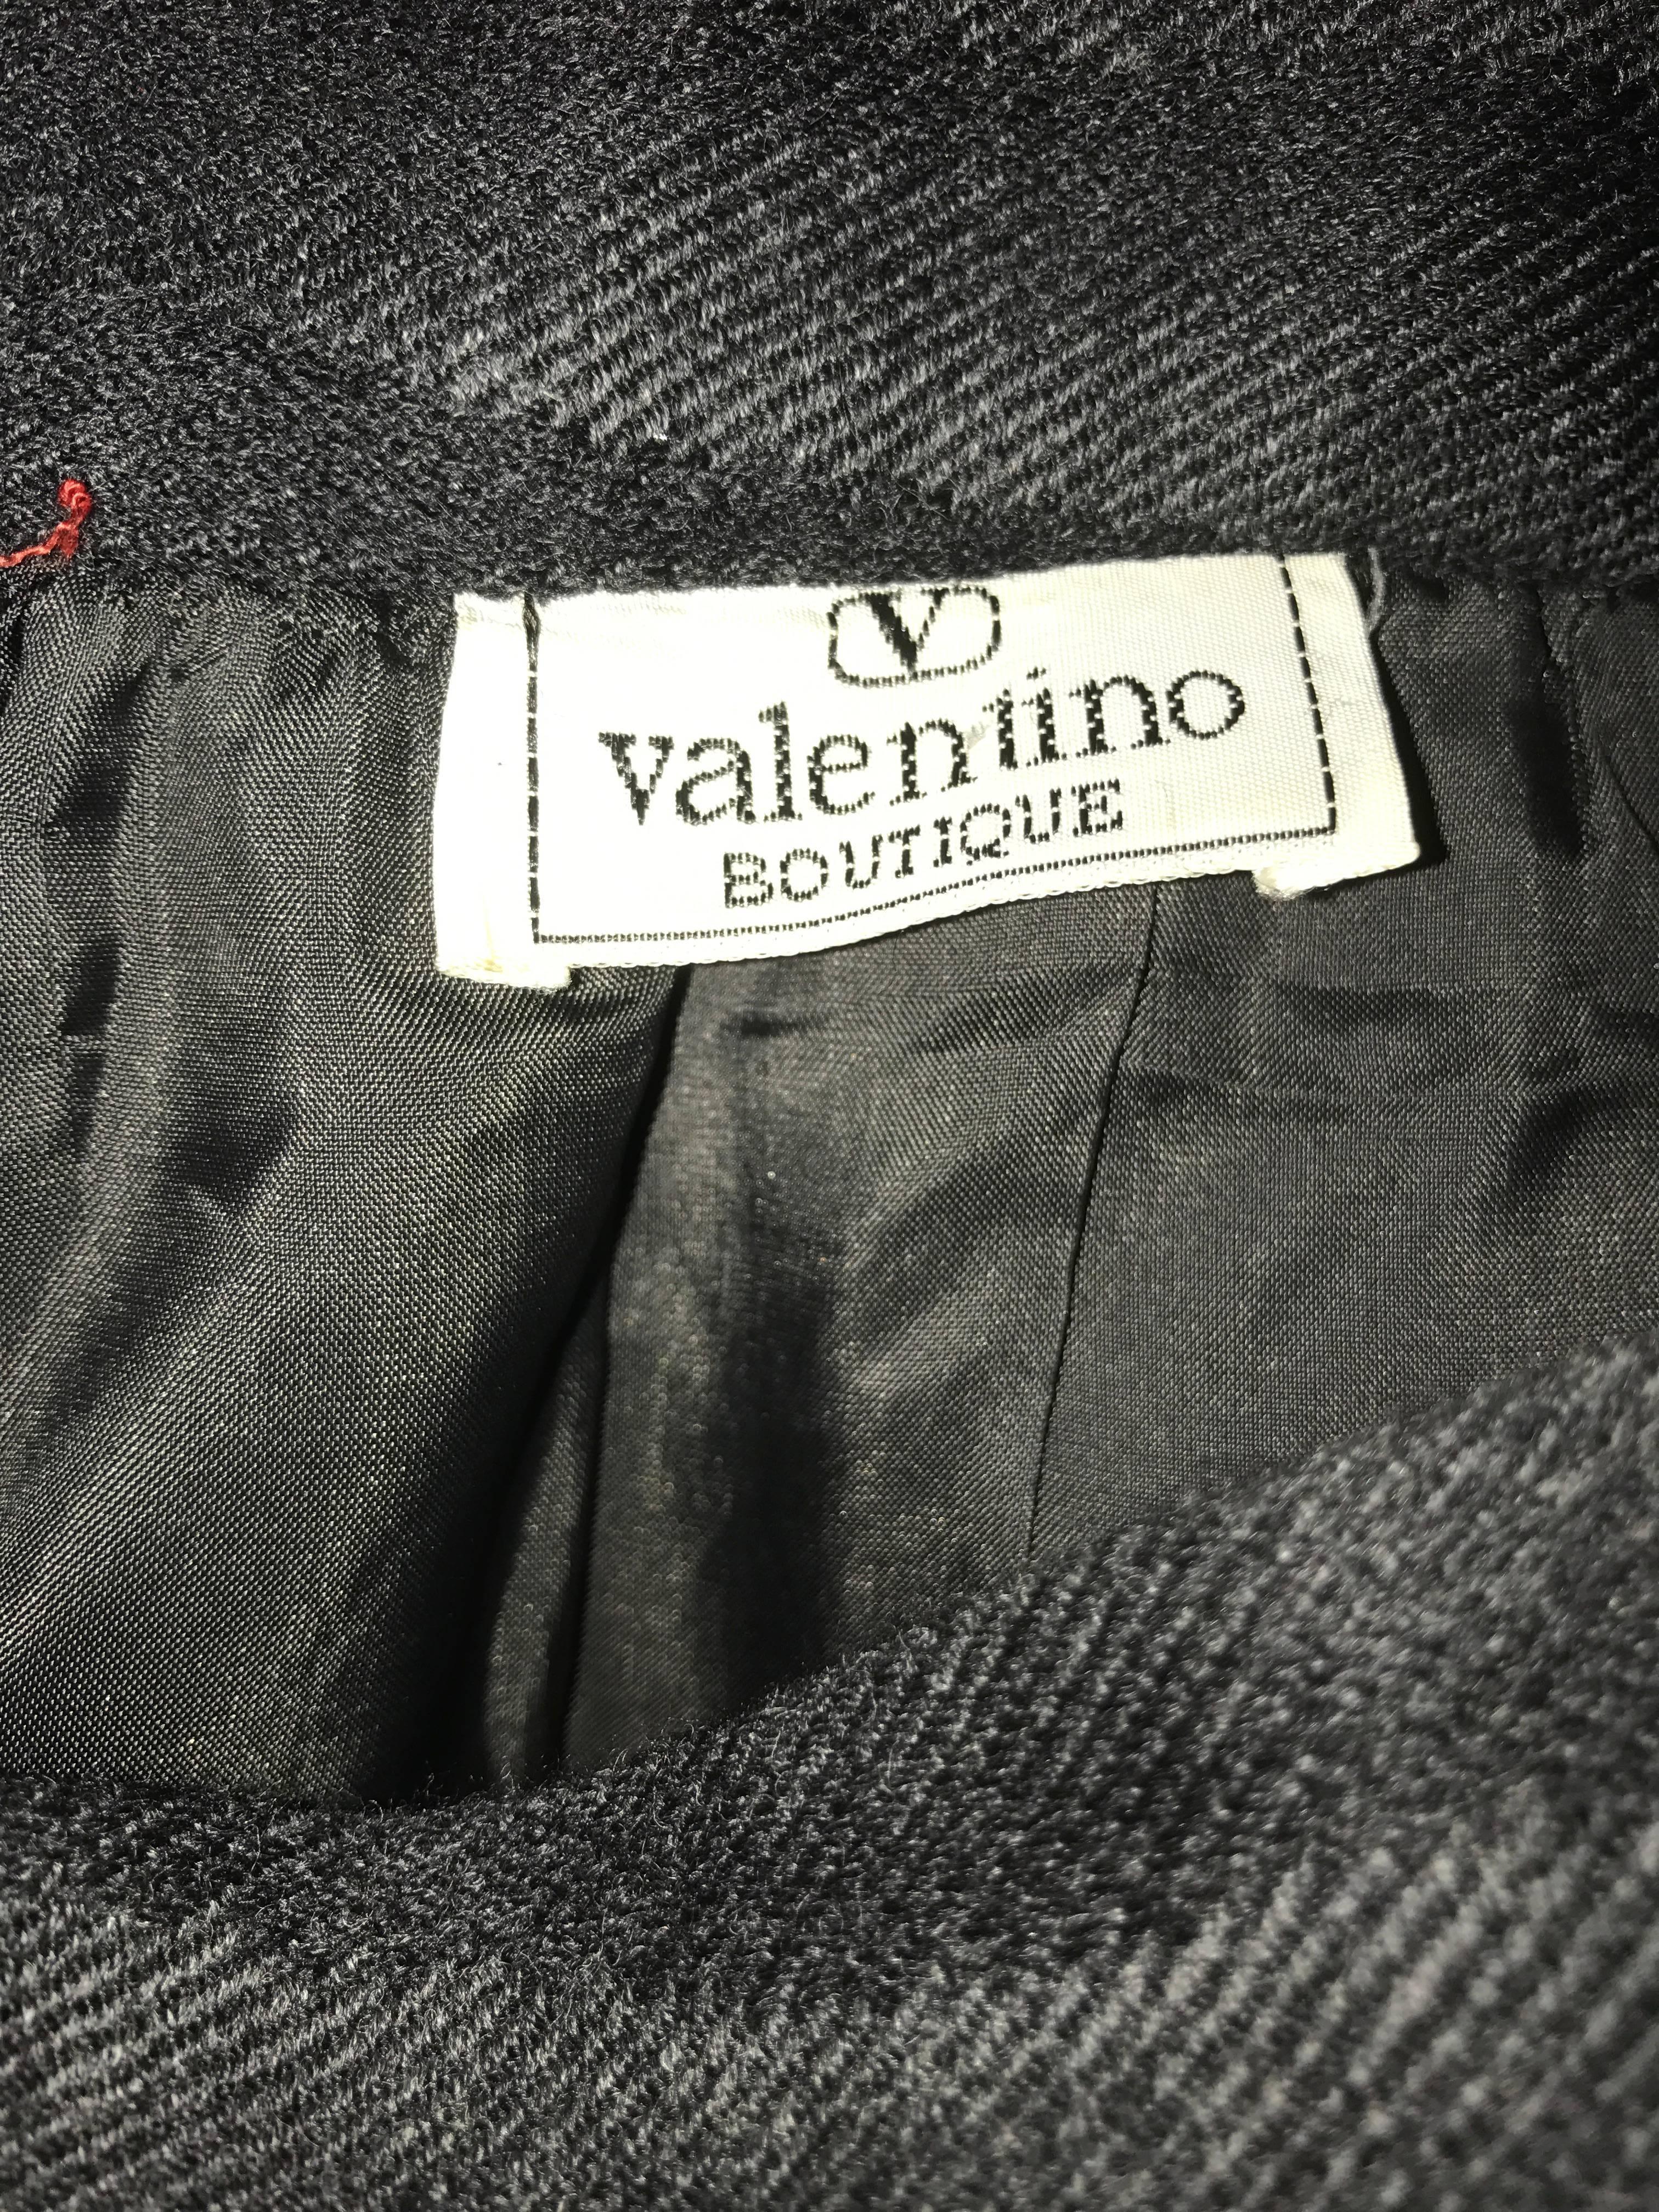 Vintage Valentino 1980s Optical Illusion Gray + Black High Waisted Pencil Skirt For Sale 6